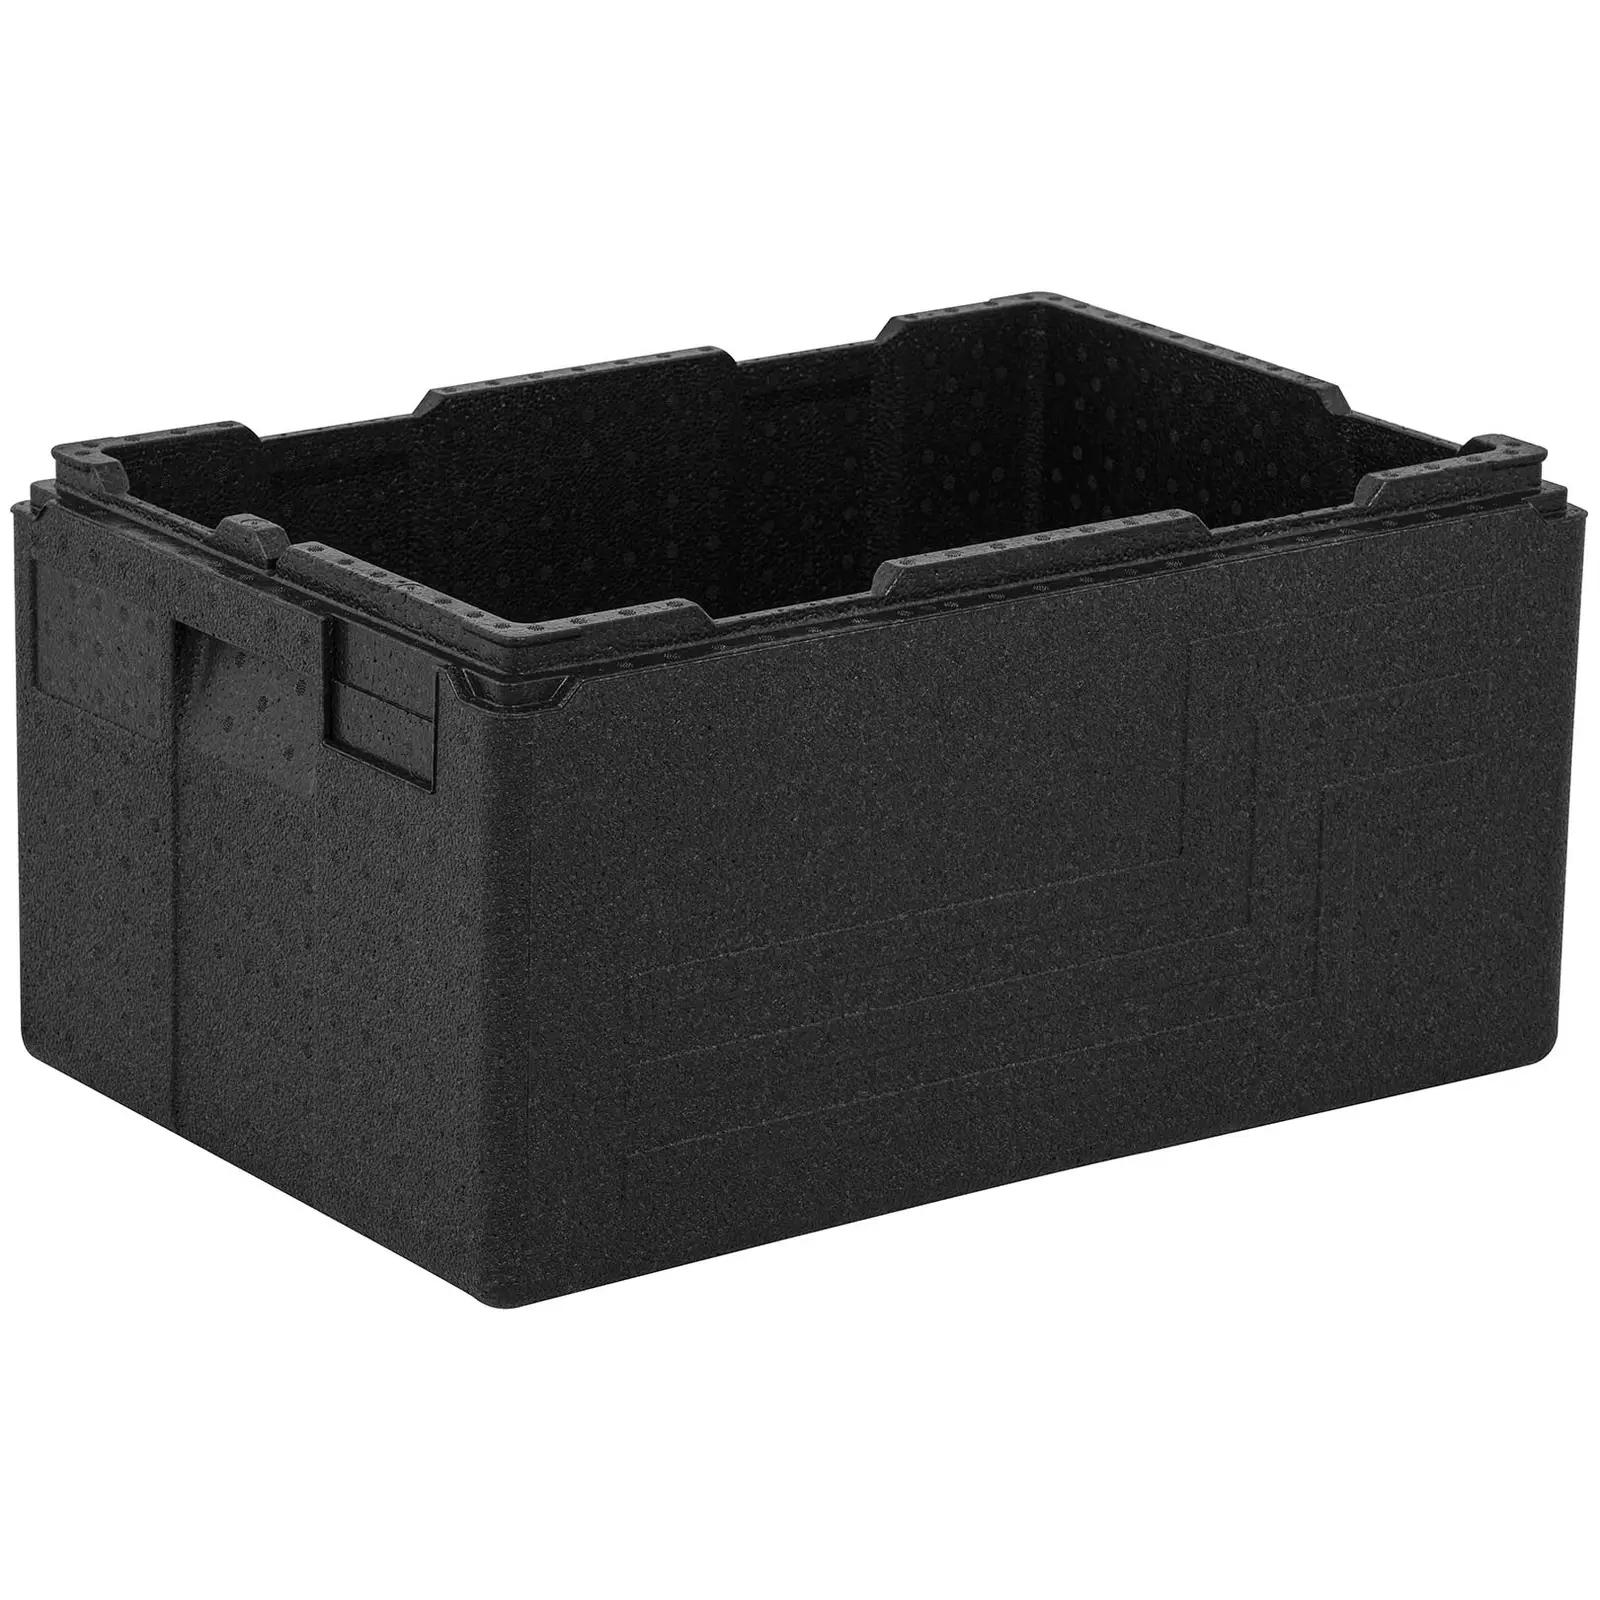 Thermobox - GN 1/1 container (20 cm deep)